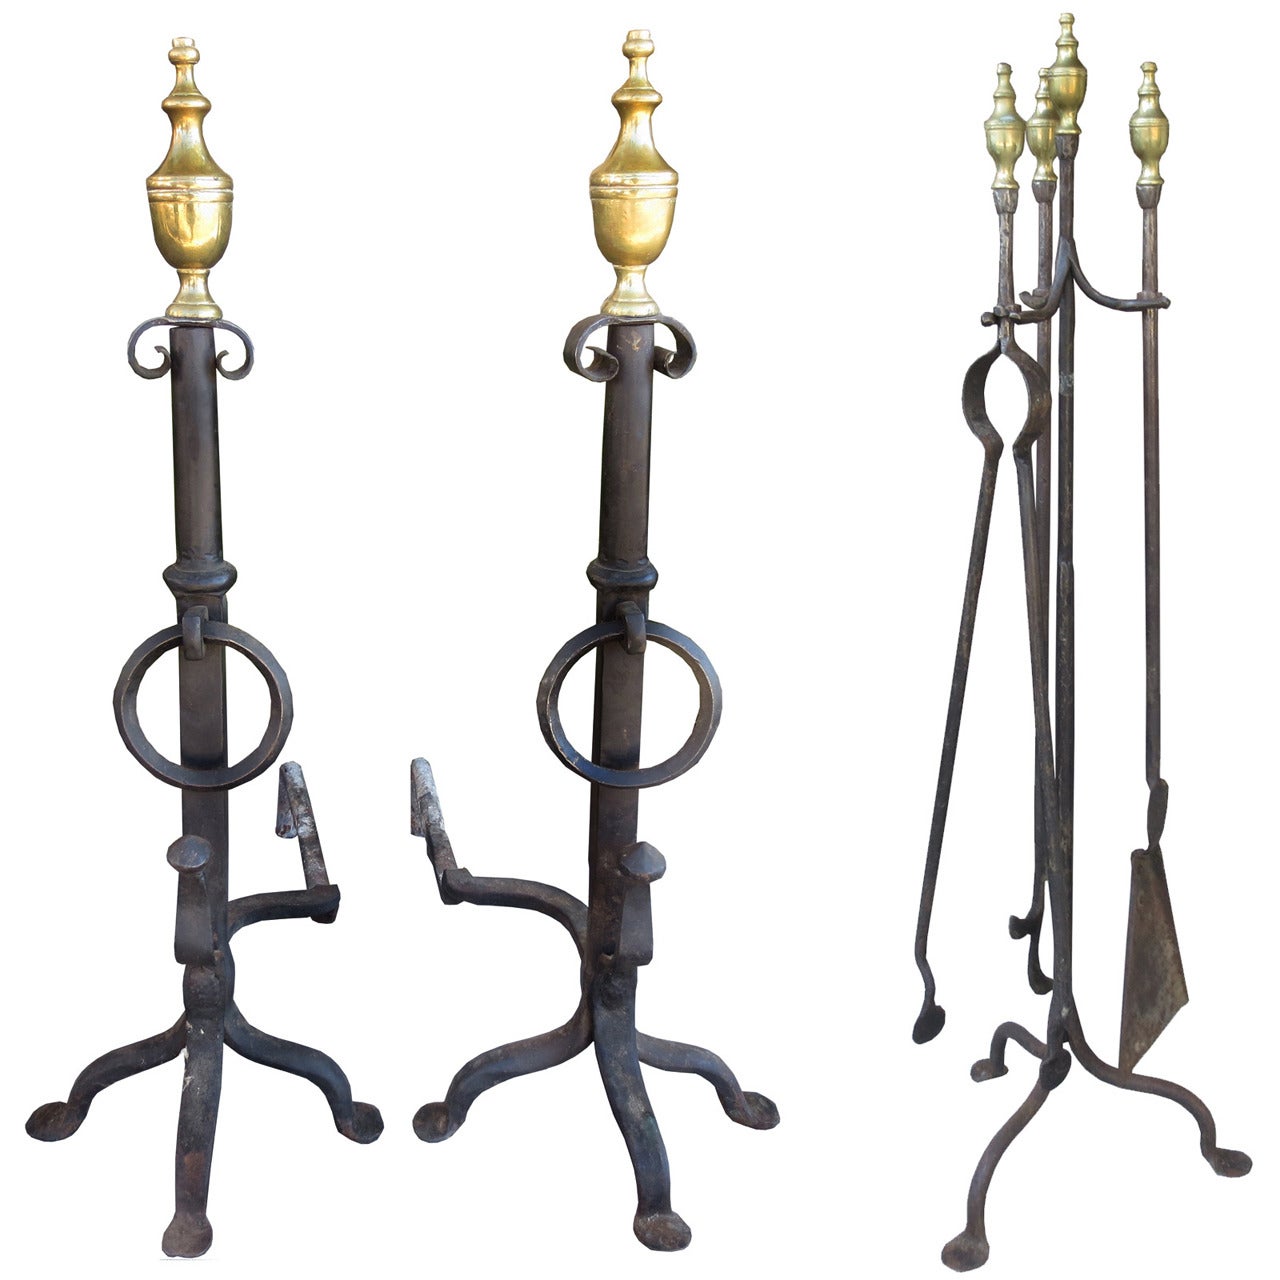 Pair of Late 19th-Early 20th Century Large Brass and Iron Andirons